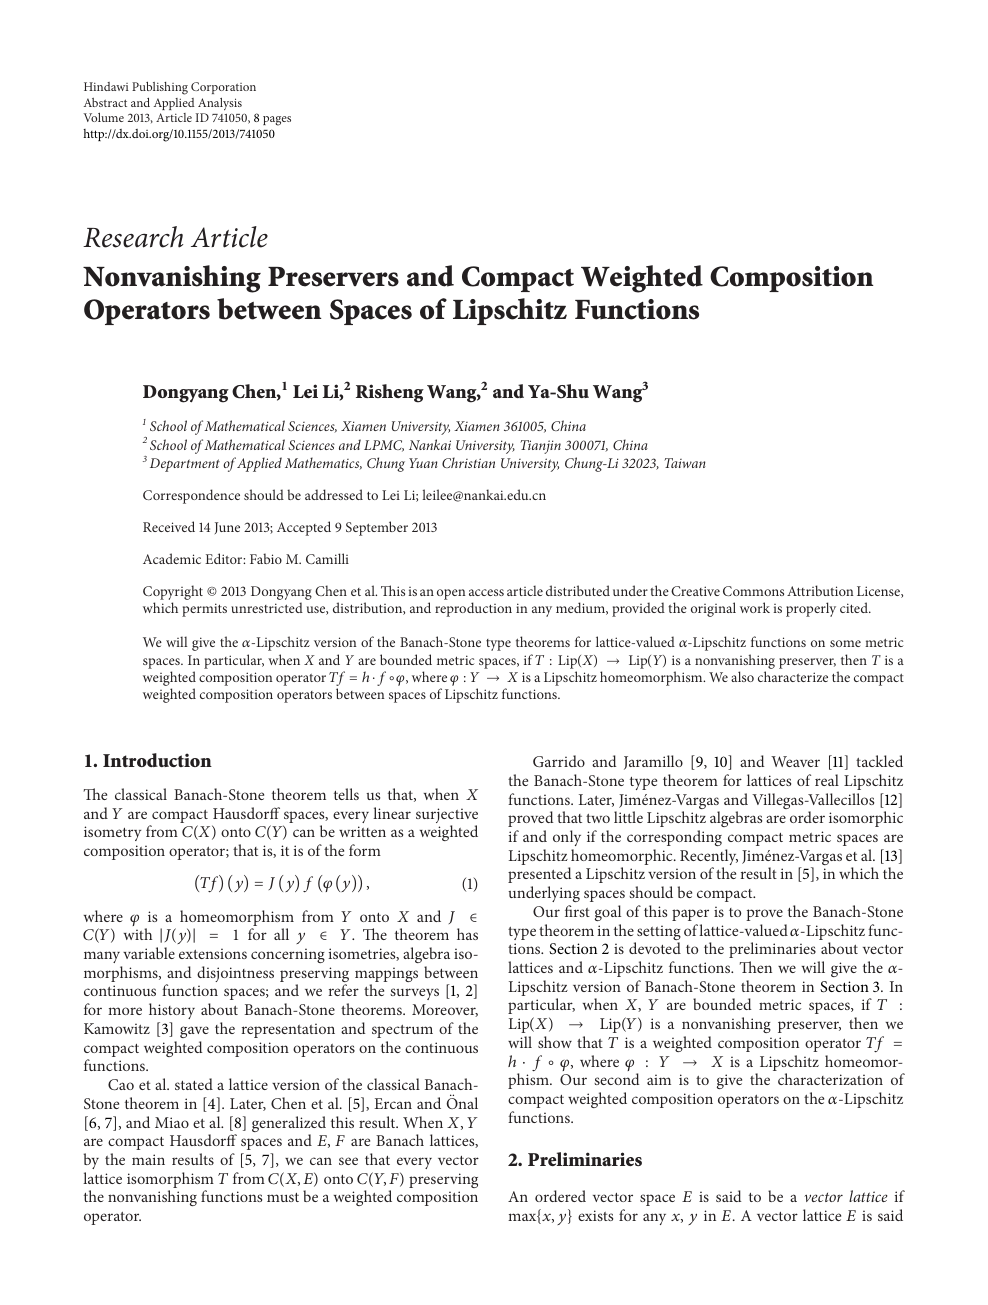 Nonvanishing Preservers And Compact Weighted Composition Operators Between Spaces Of Lipschitz Functions Topic Of Research Paper In Mathematics Download Scholarly Article Pdf And Read For Free On Cyberleninka Open Science Hub